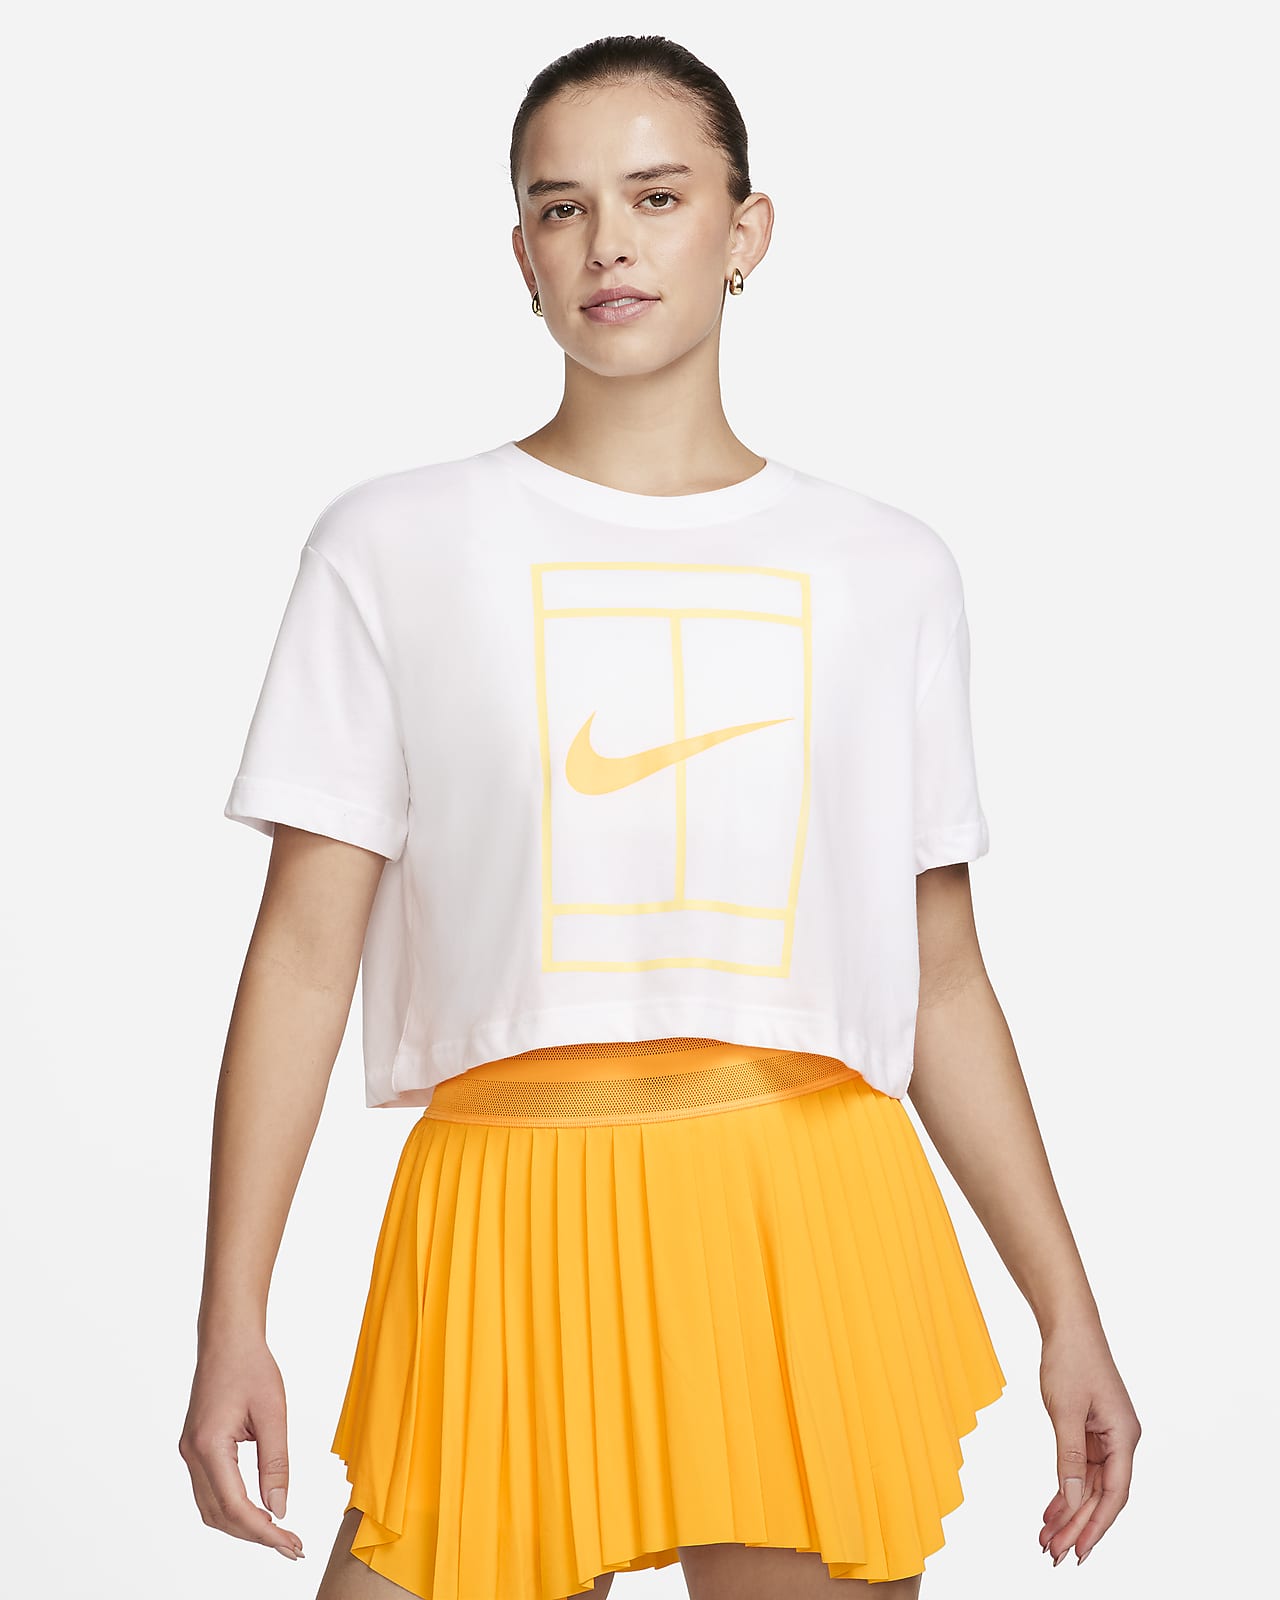 Nike Heritage Women's Dri-FIT Short-Sleeve Cropped Top